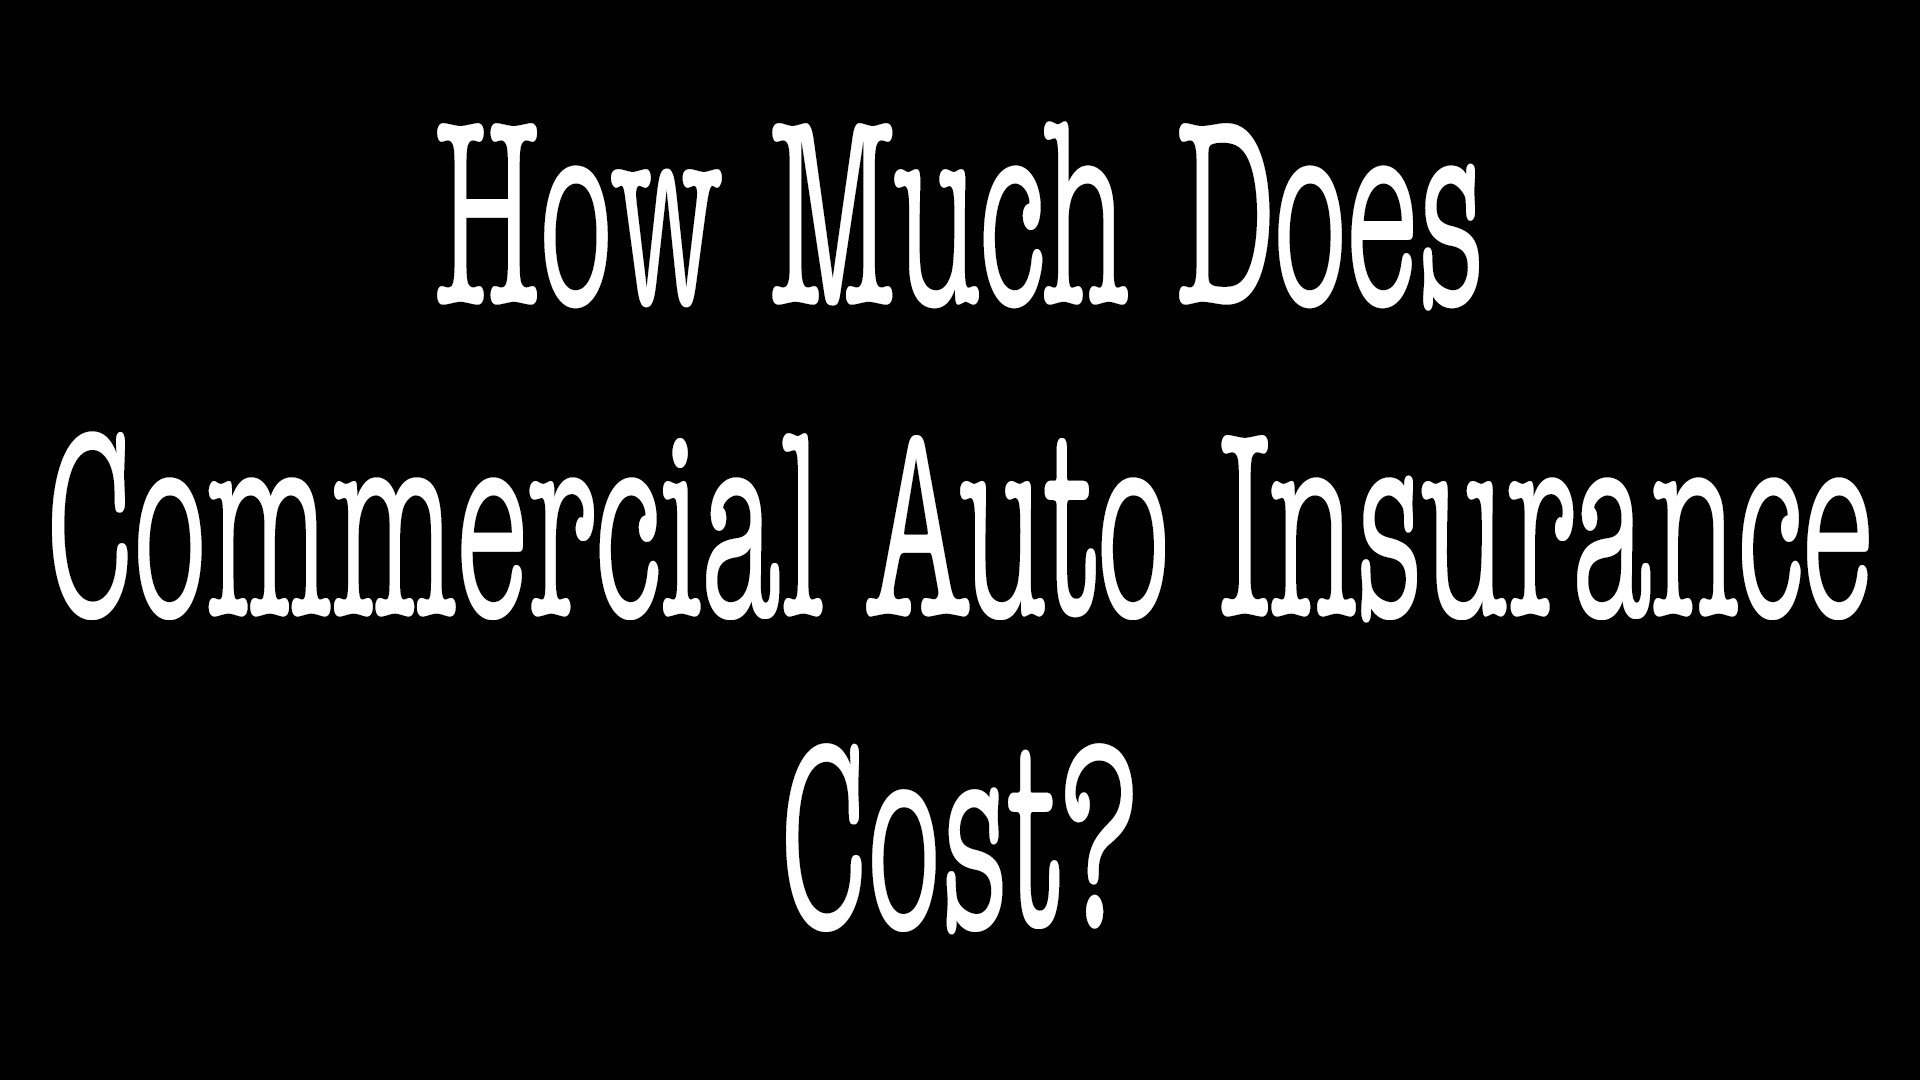 How Much Is Commercial Auto Insurance?